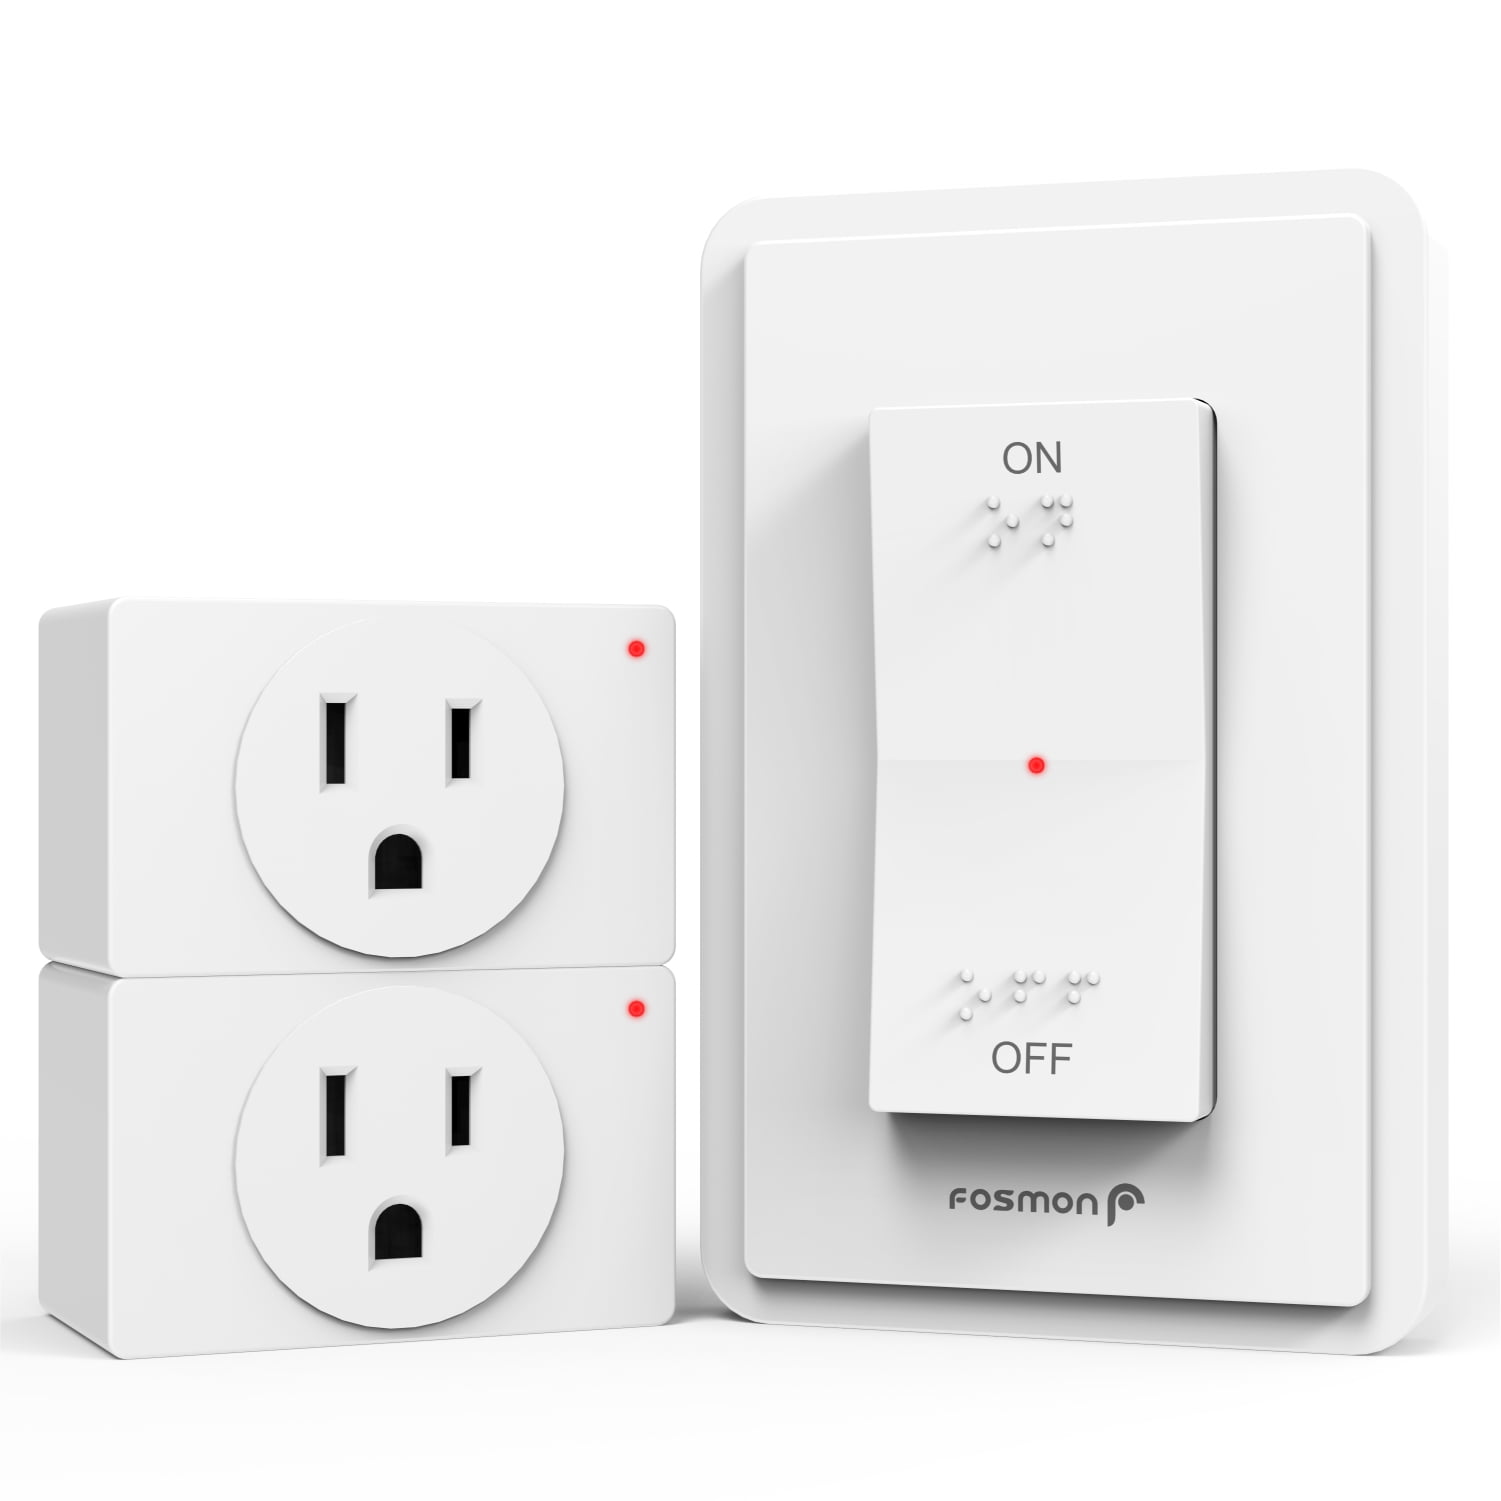 NO REMOTES) 2x Remote Control Outlet Wireless Electrical Plug